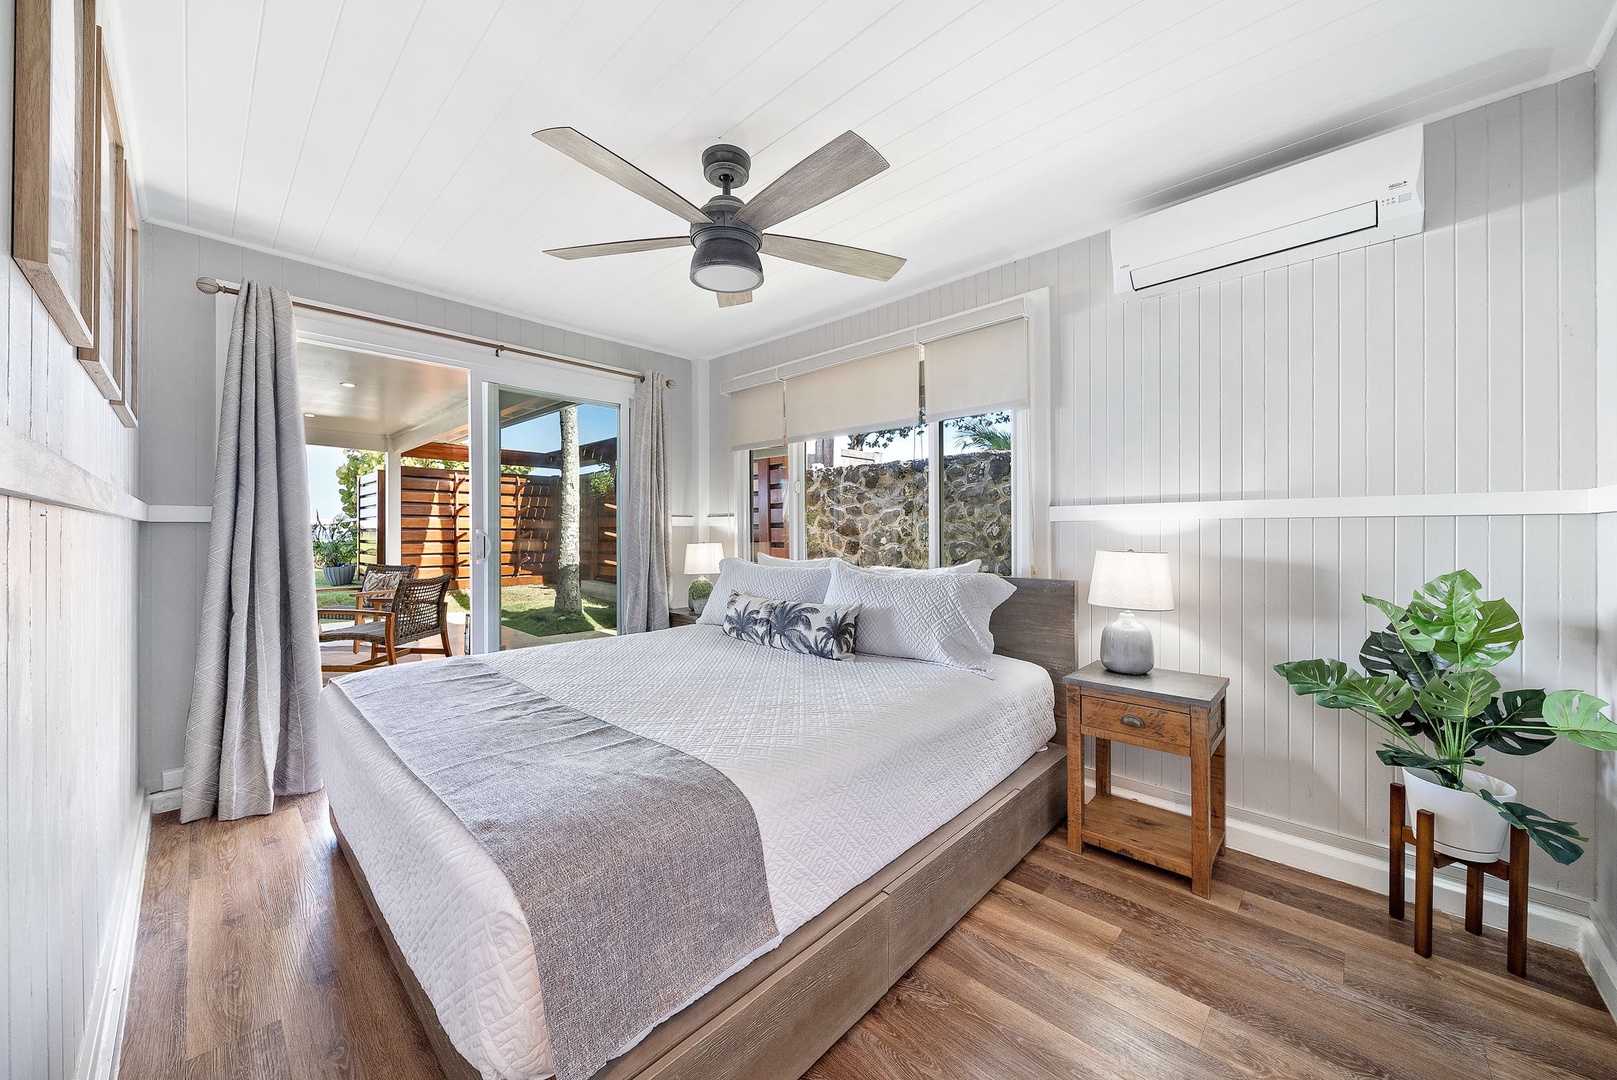 Haleiwa Vacation Rentals, Hale Nalu - Natural lights welcome you to the lower level primary suite with ceiling fan and split A/C